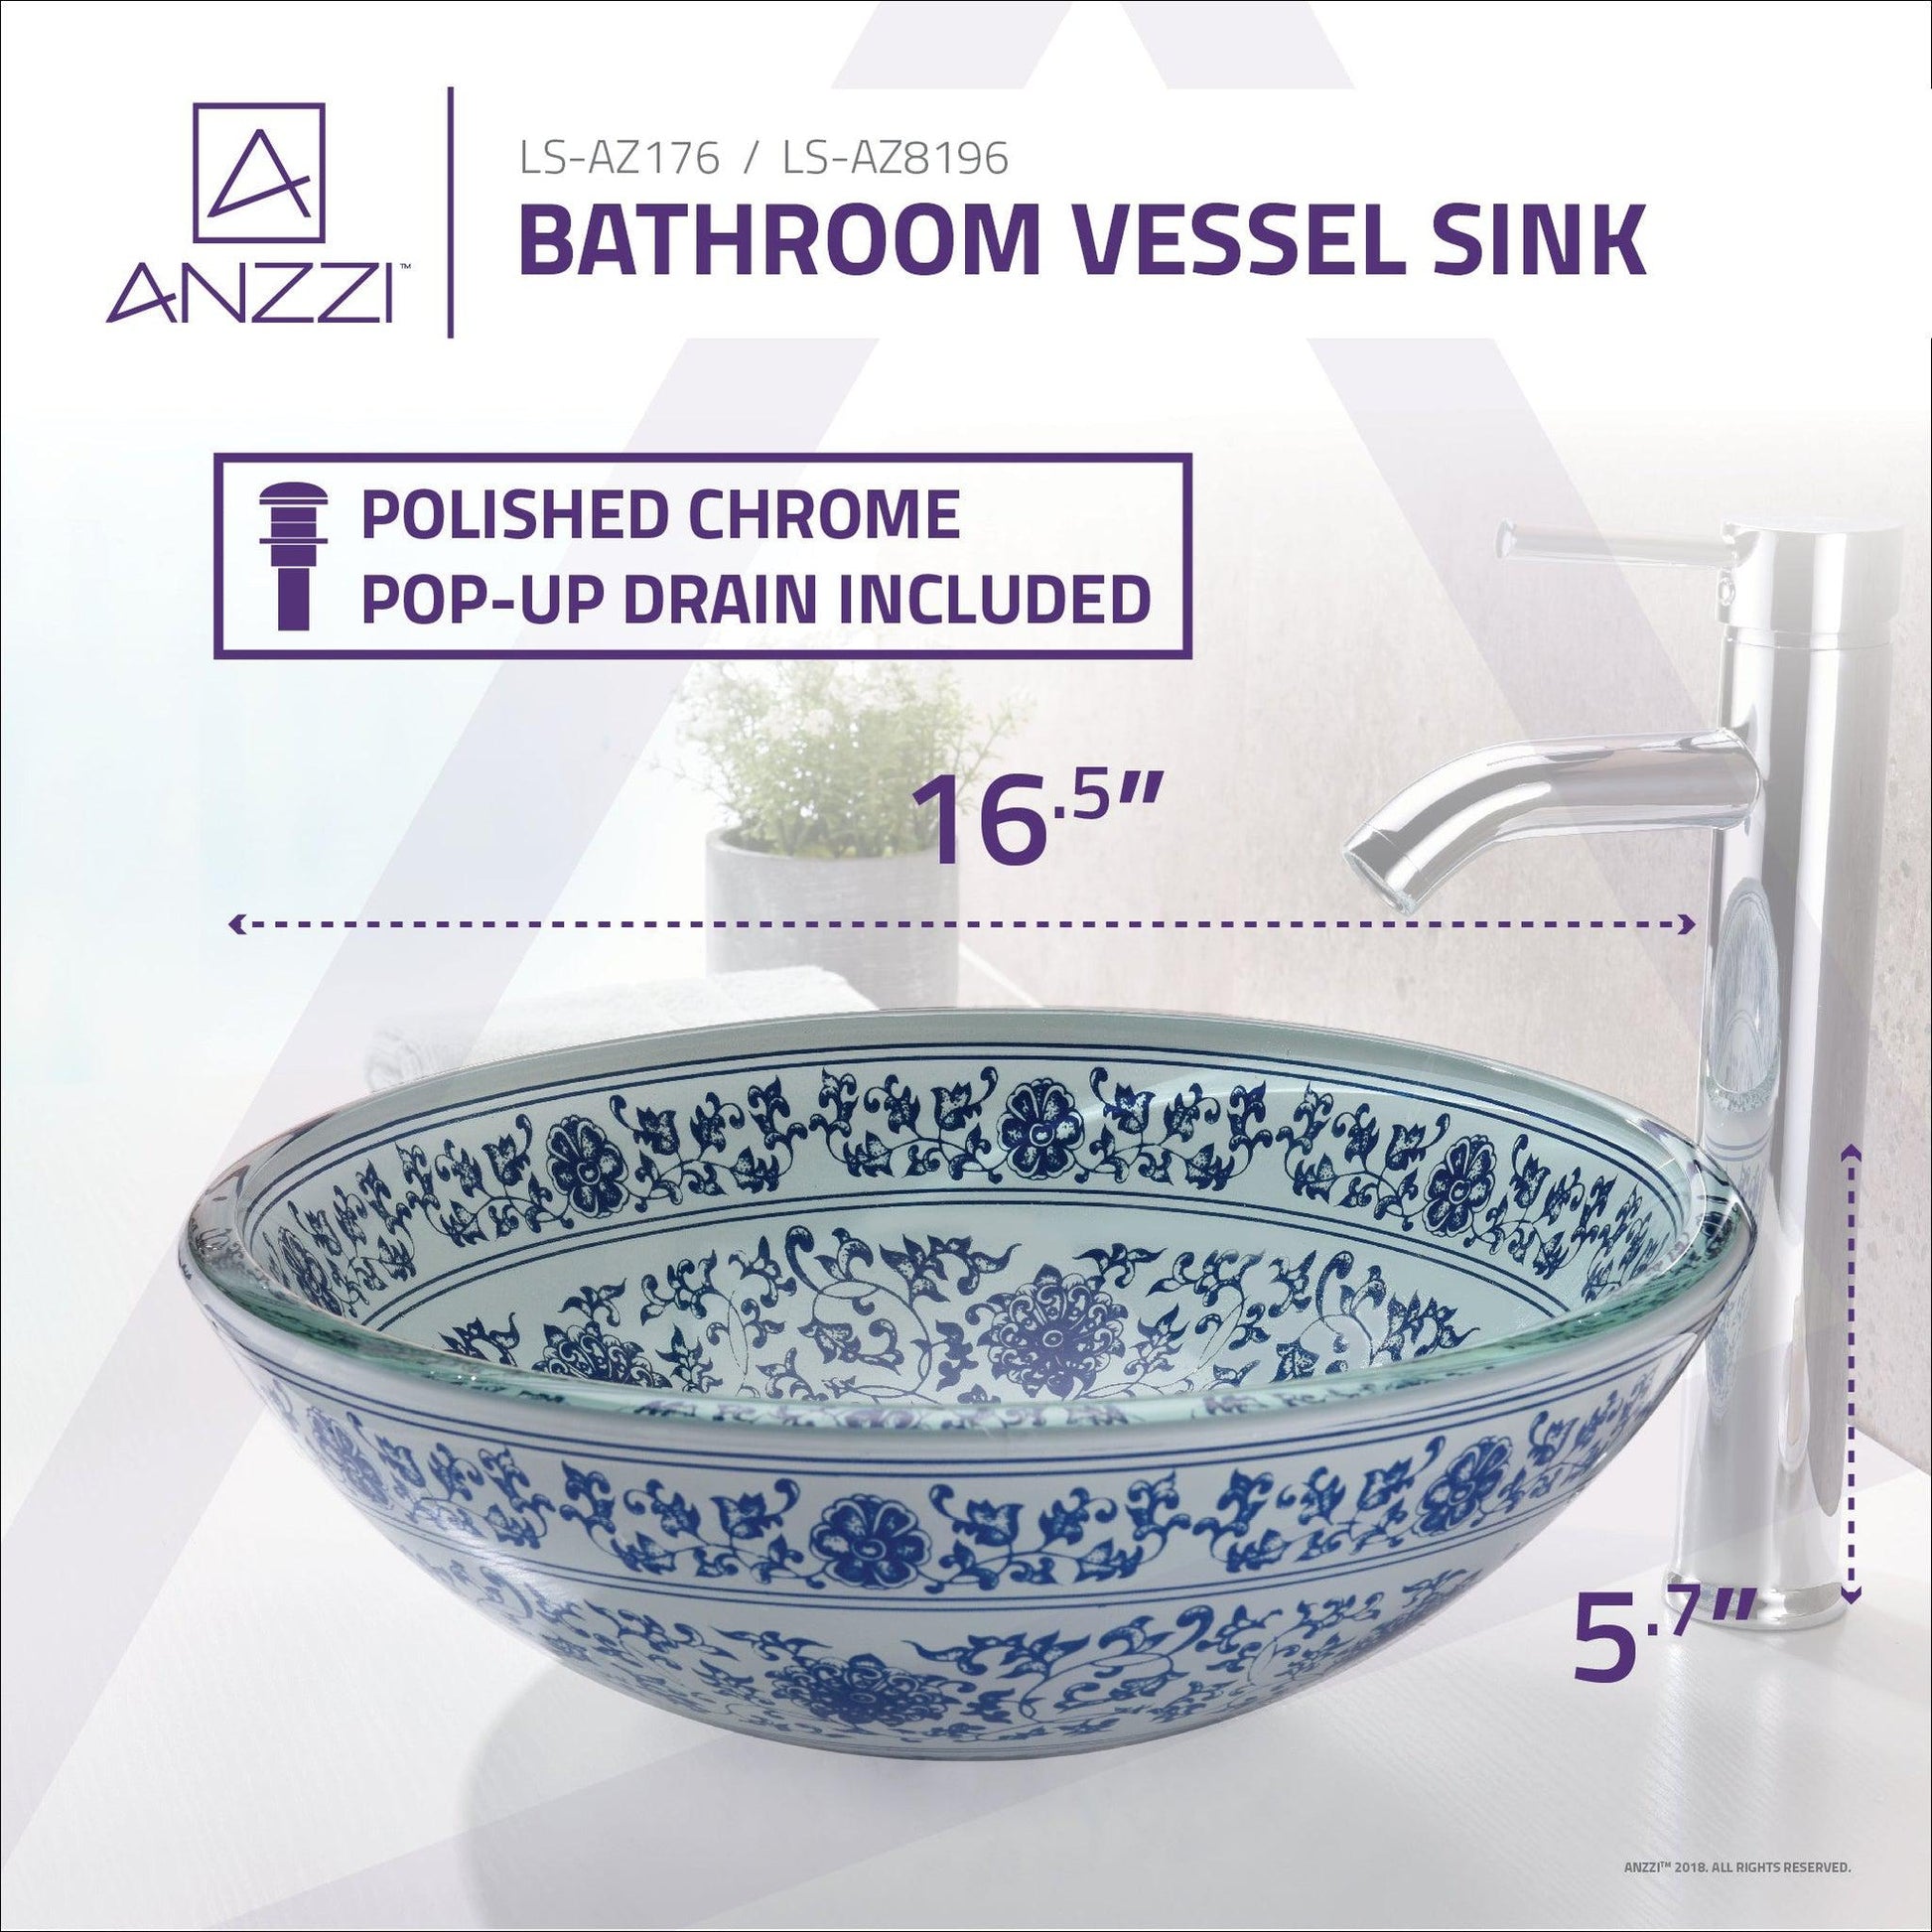 ANZZI Cadence Series 16" x 16" Round White and Blue Floral Deco-Glass Vessel Sink With Polished Chrome Pop-Up Drain